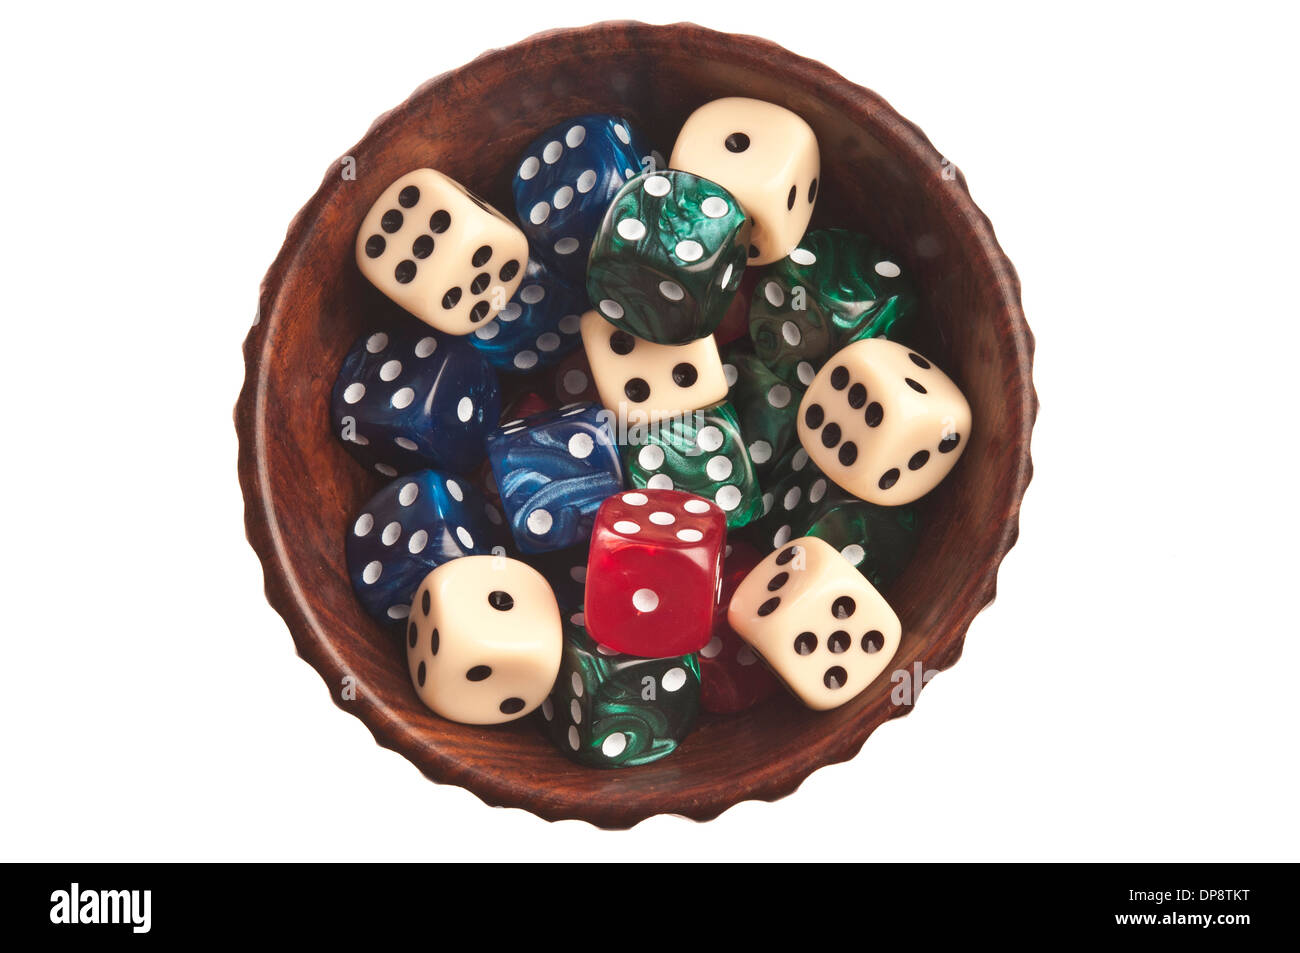 dice in a bowl Stock Photo